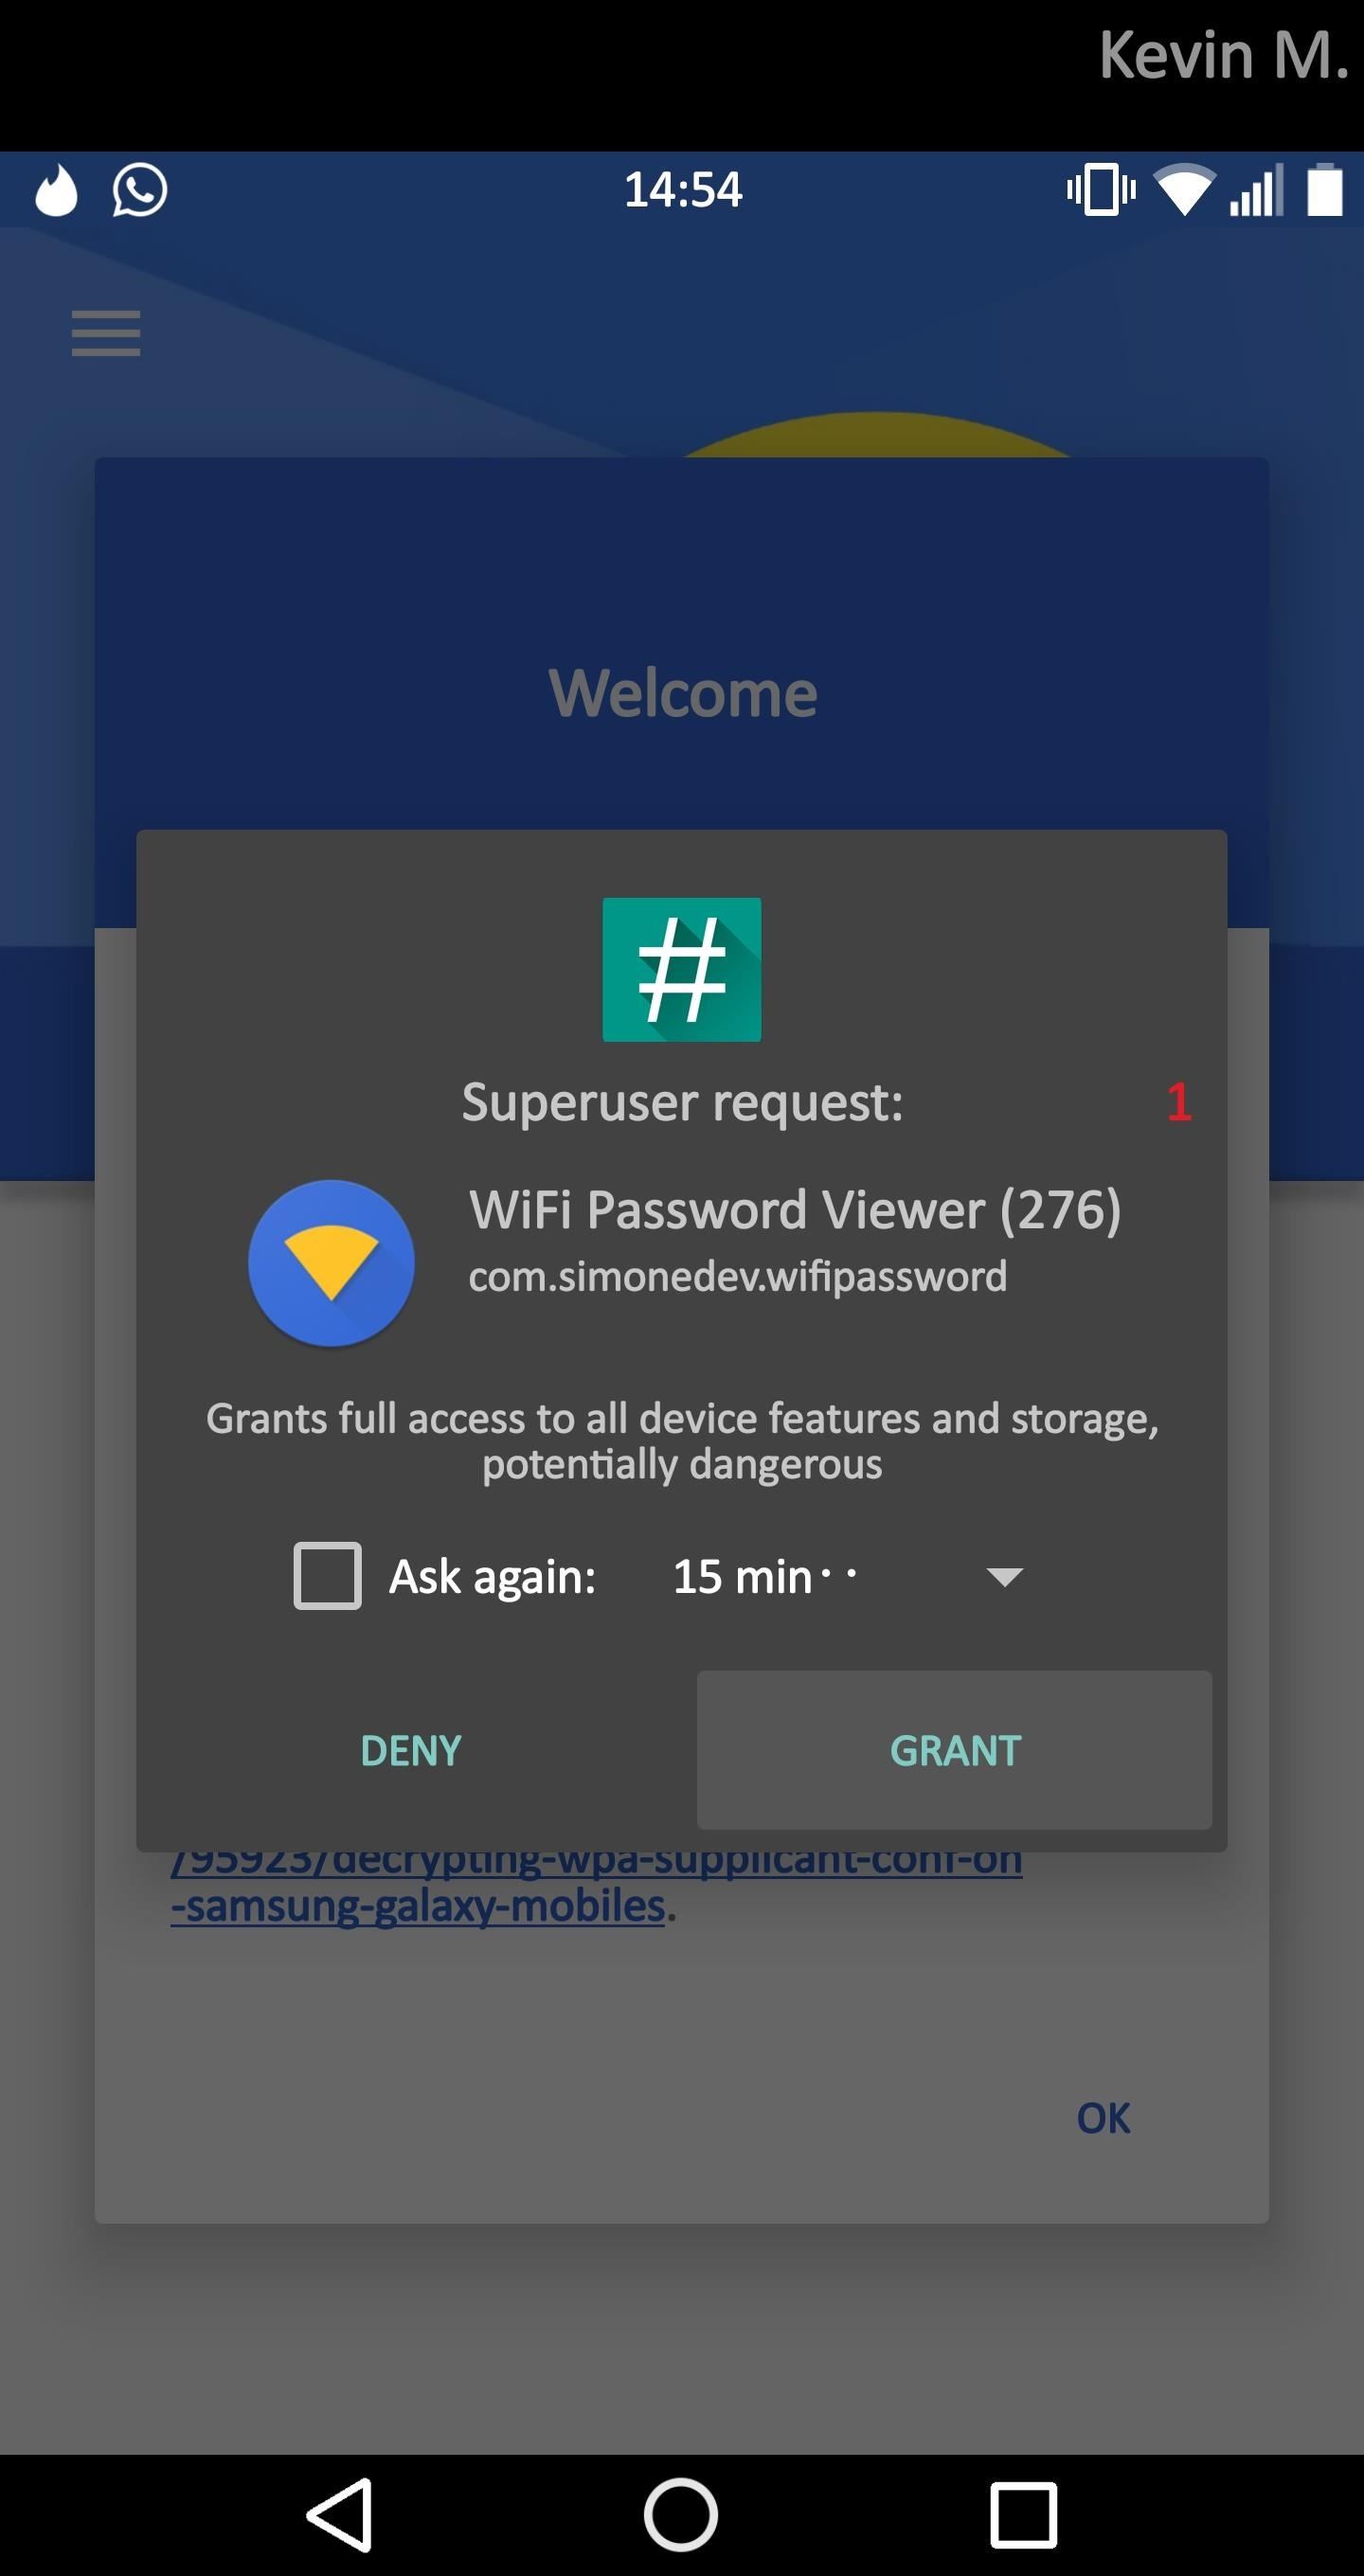 How to Easily See Passwords for Wi-Fi Networks You've Connected Your Android Device To